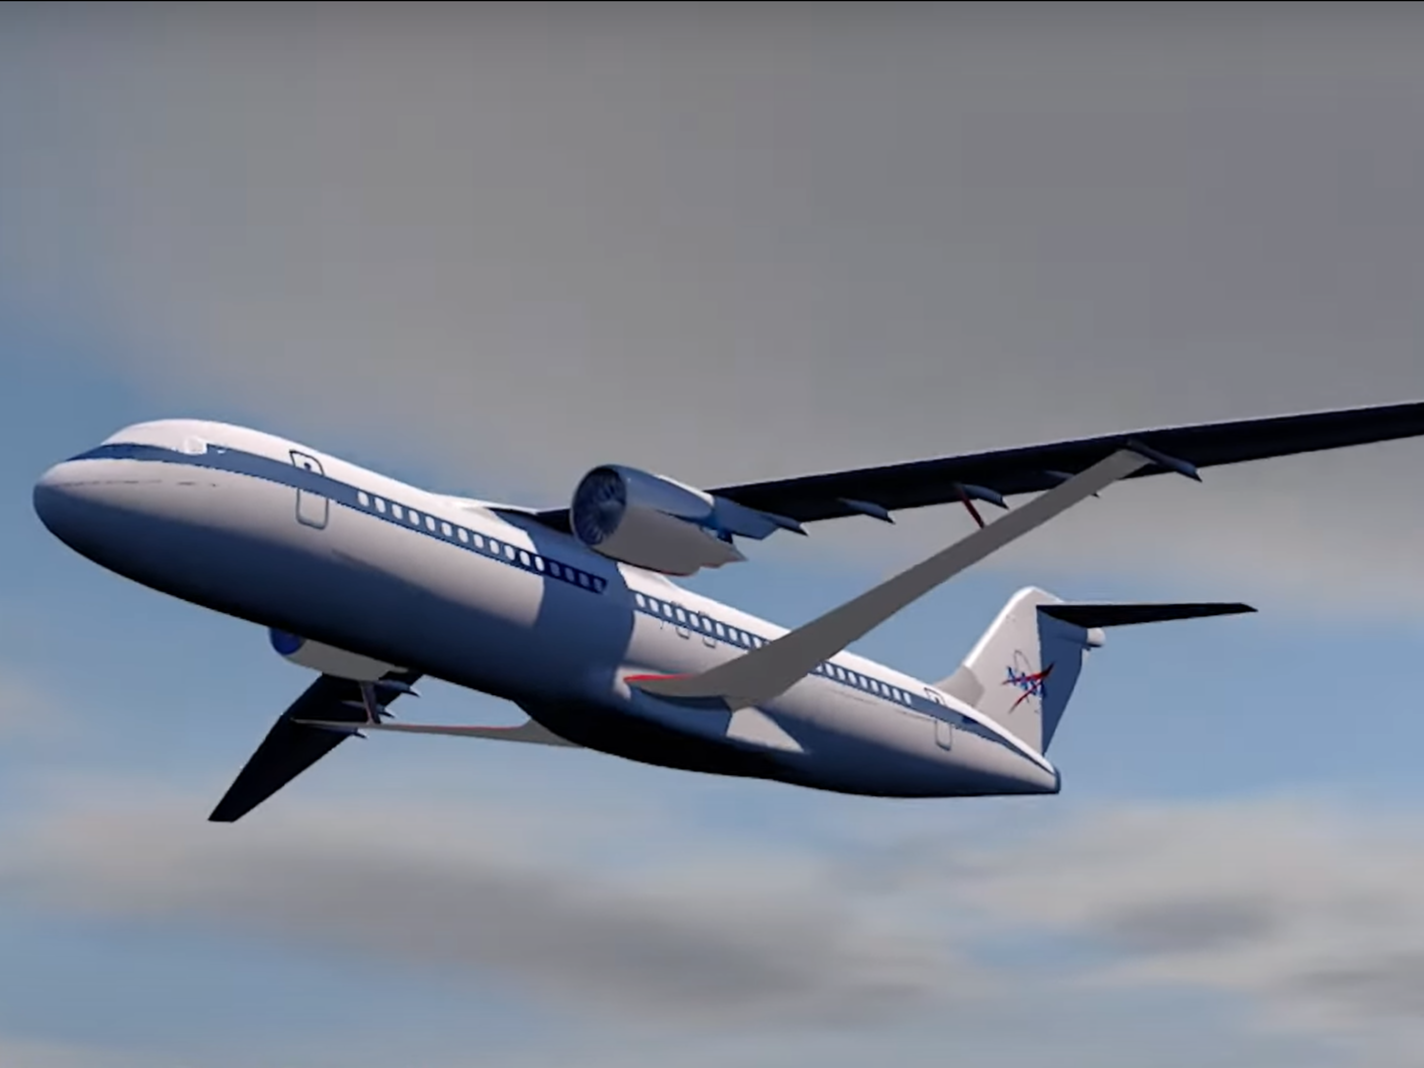 Nasa’s Sustainable Flight Demonstrator project is developing a new passenger plane with an aerodynamic design that will significantly cut emissions